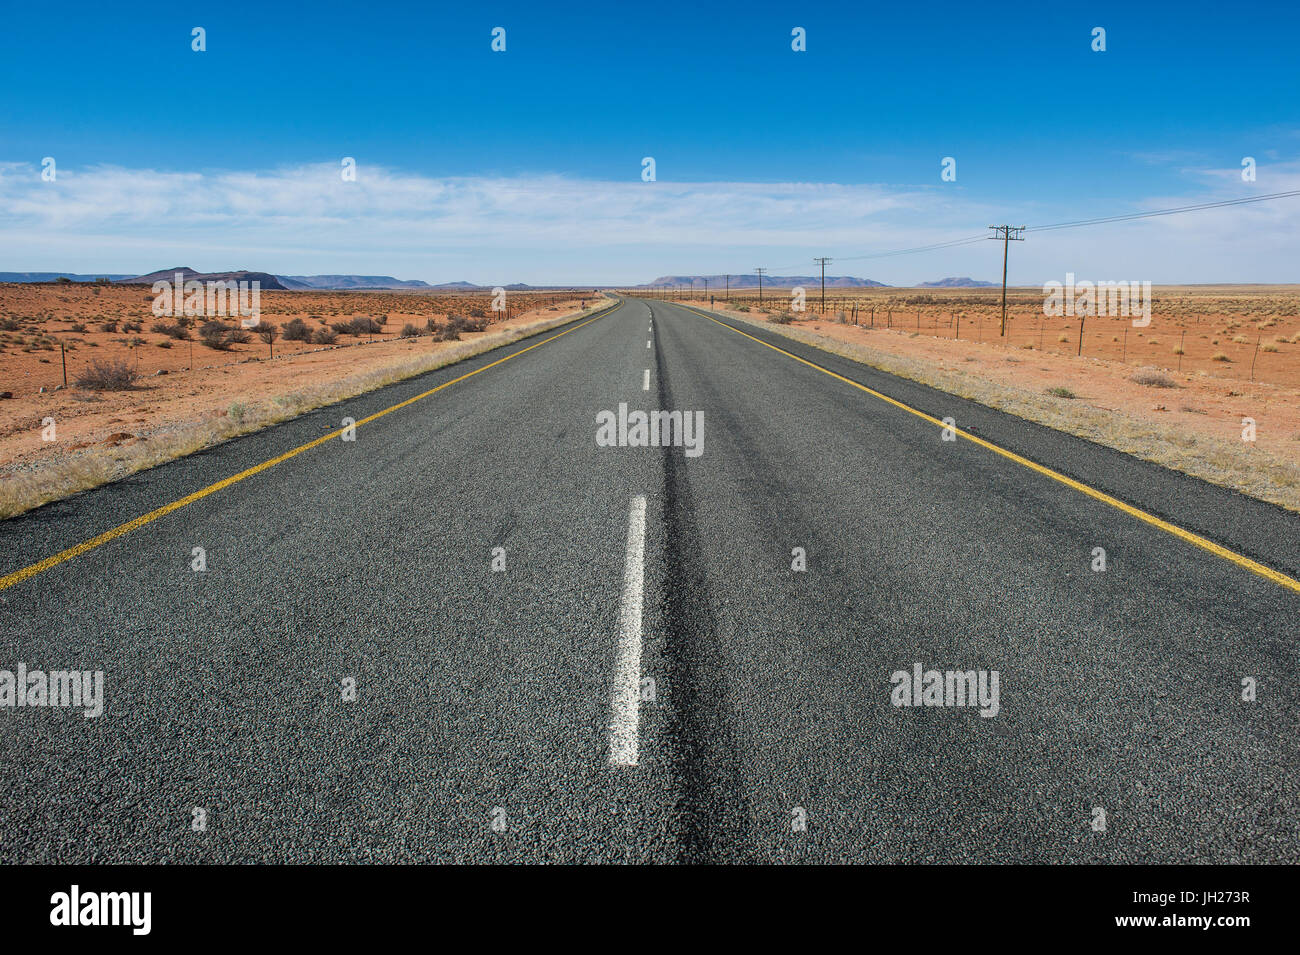 Road Number 7 leading to Namibia, South Africa, Africa Stock Photo